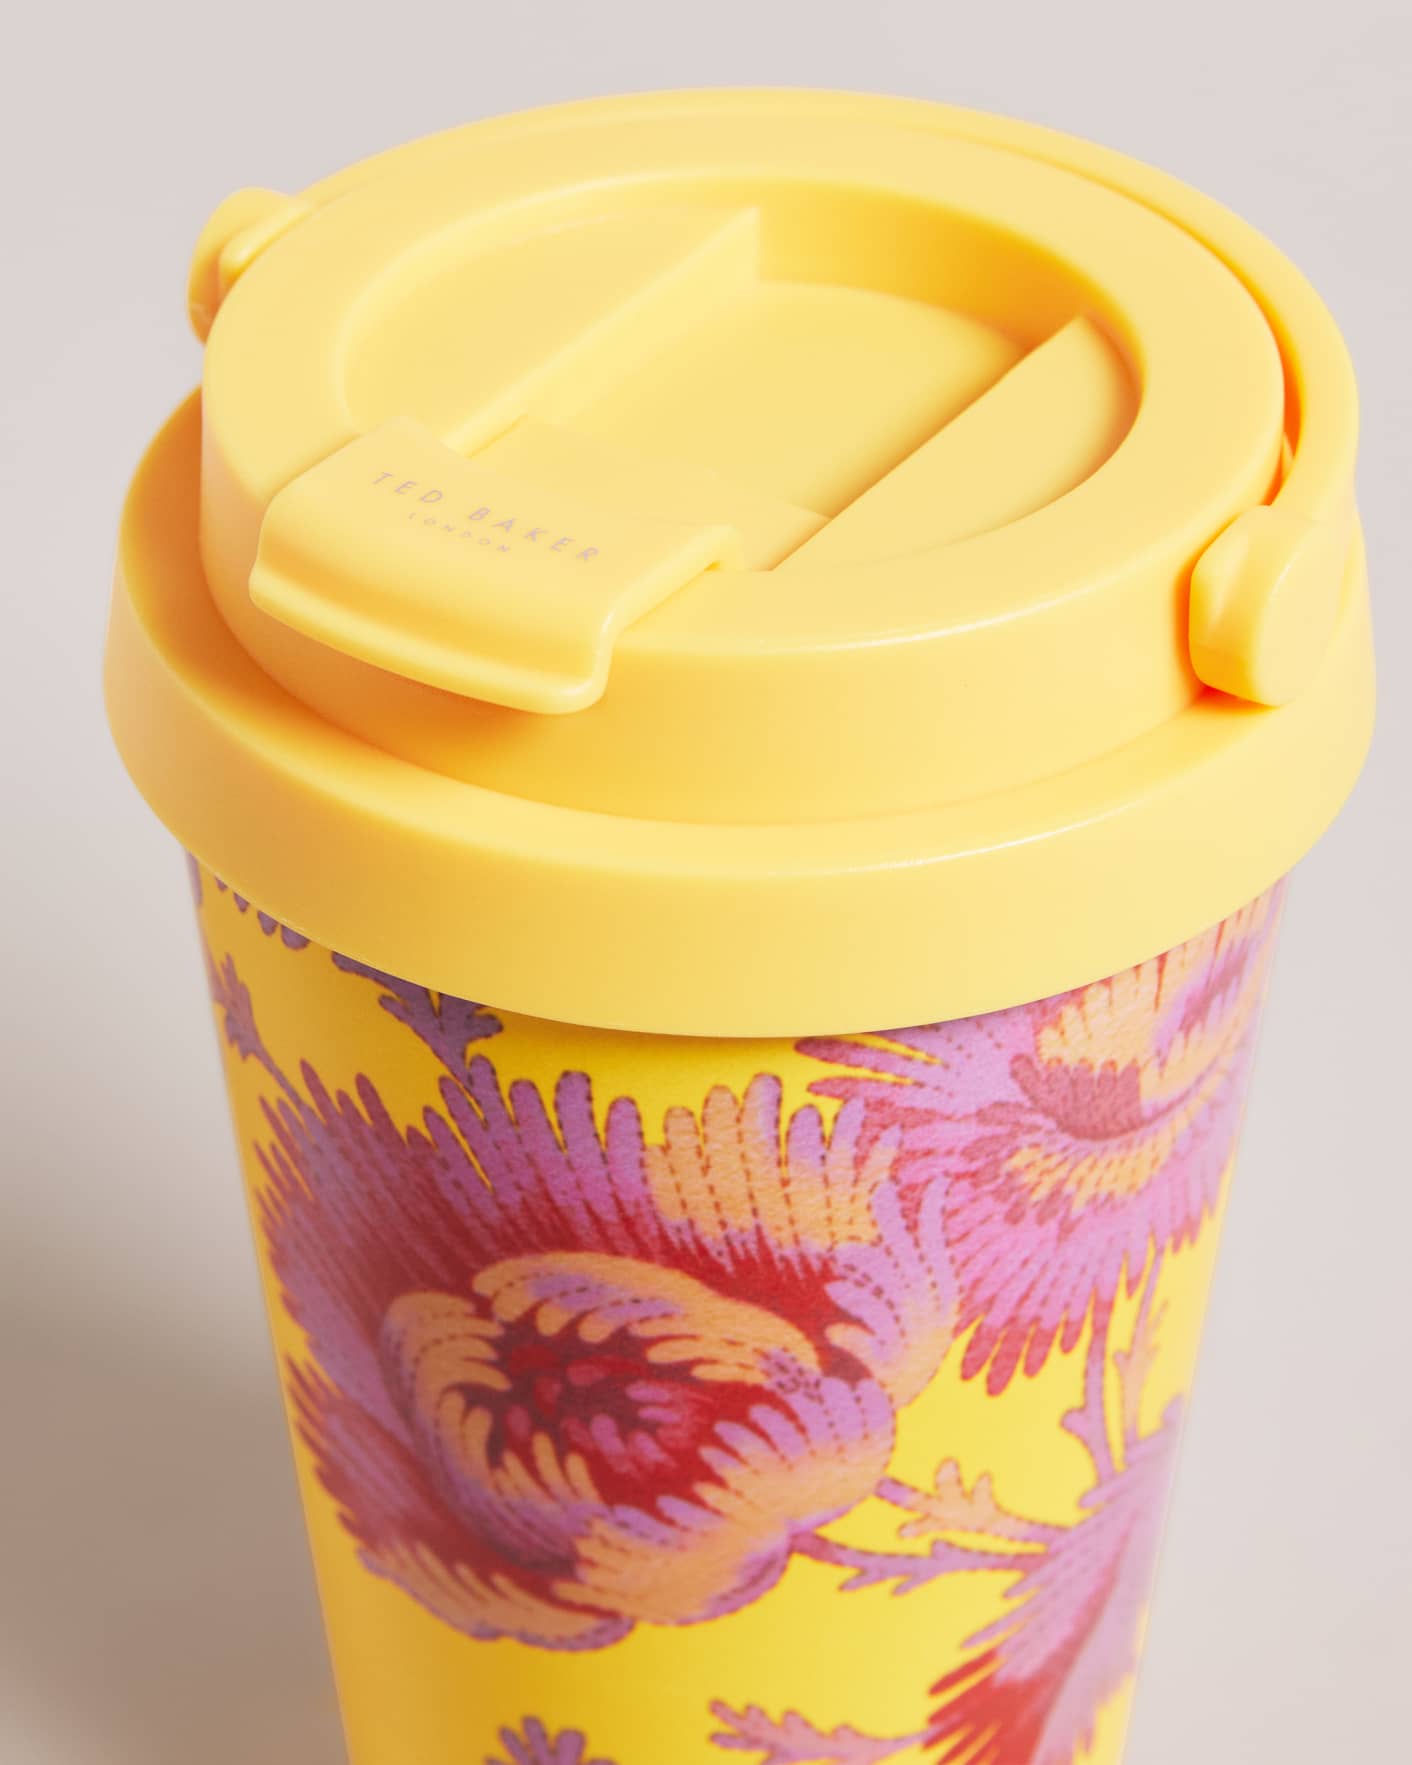 Yellow Floral Print 350ml Travel Cup Ted Baker